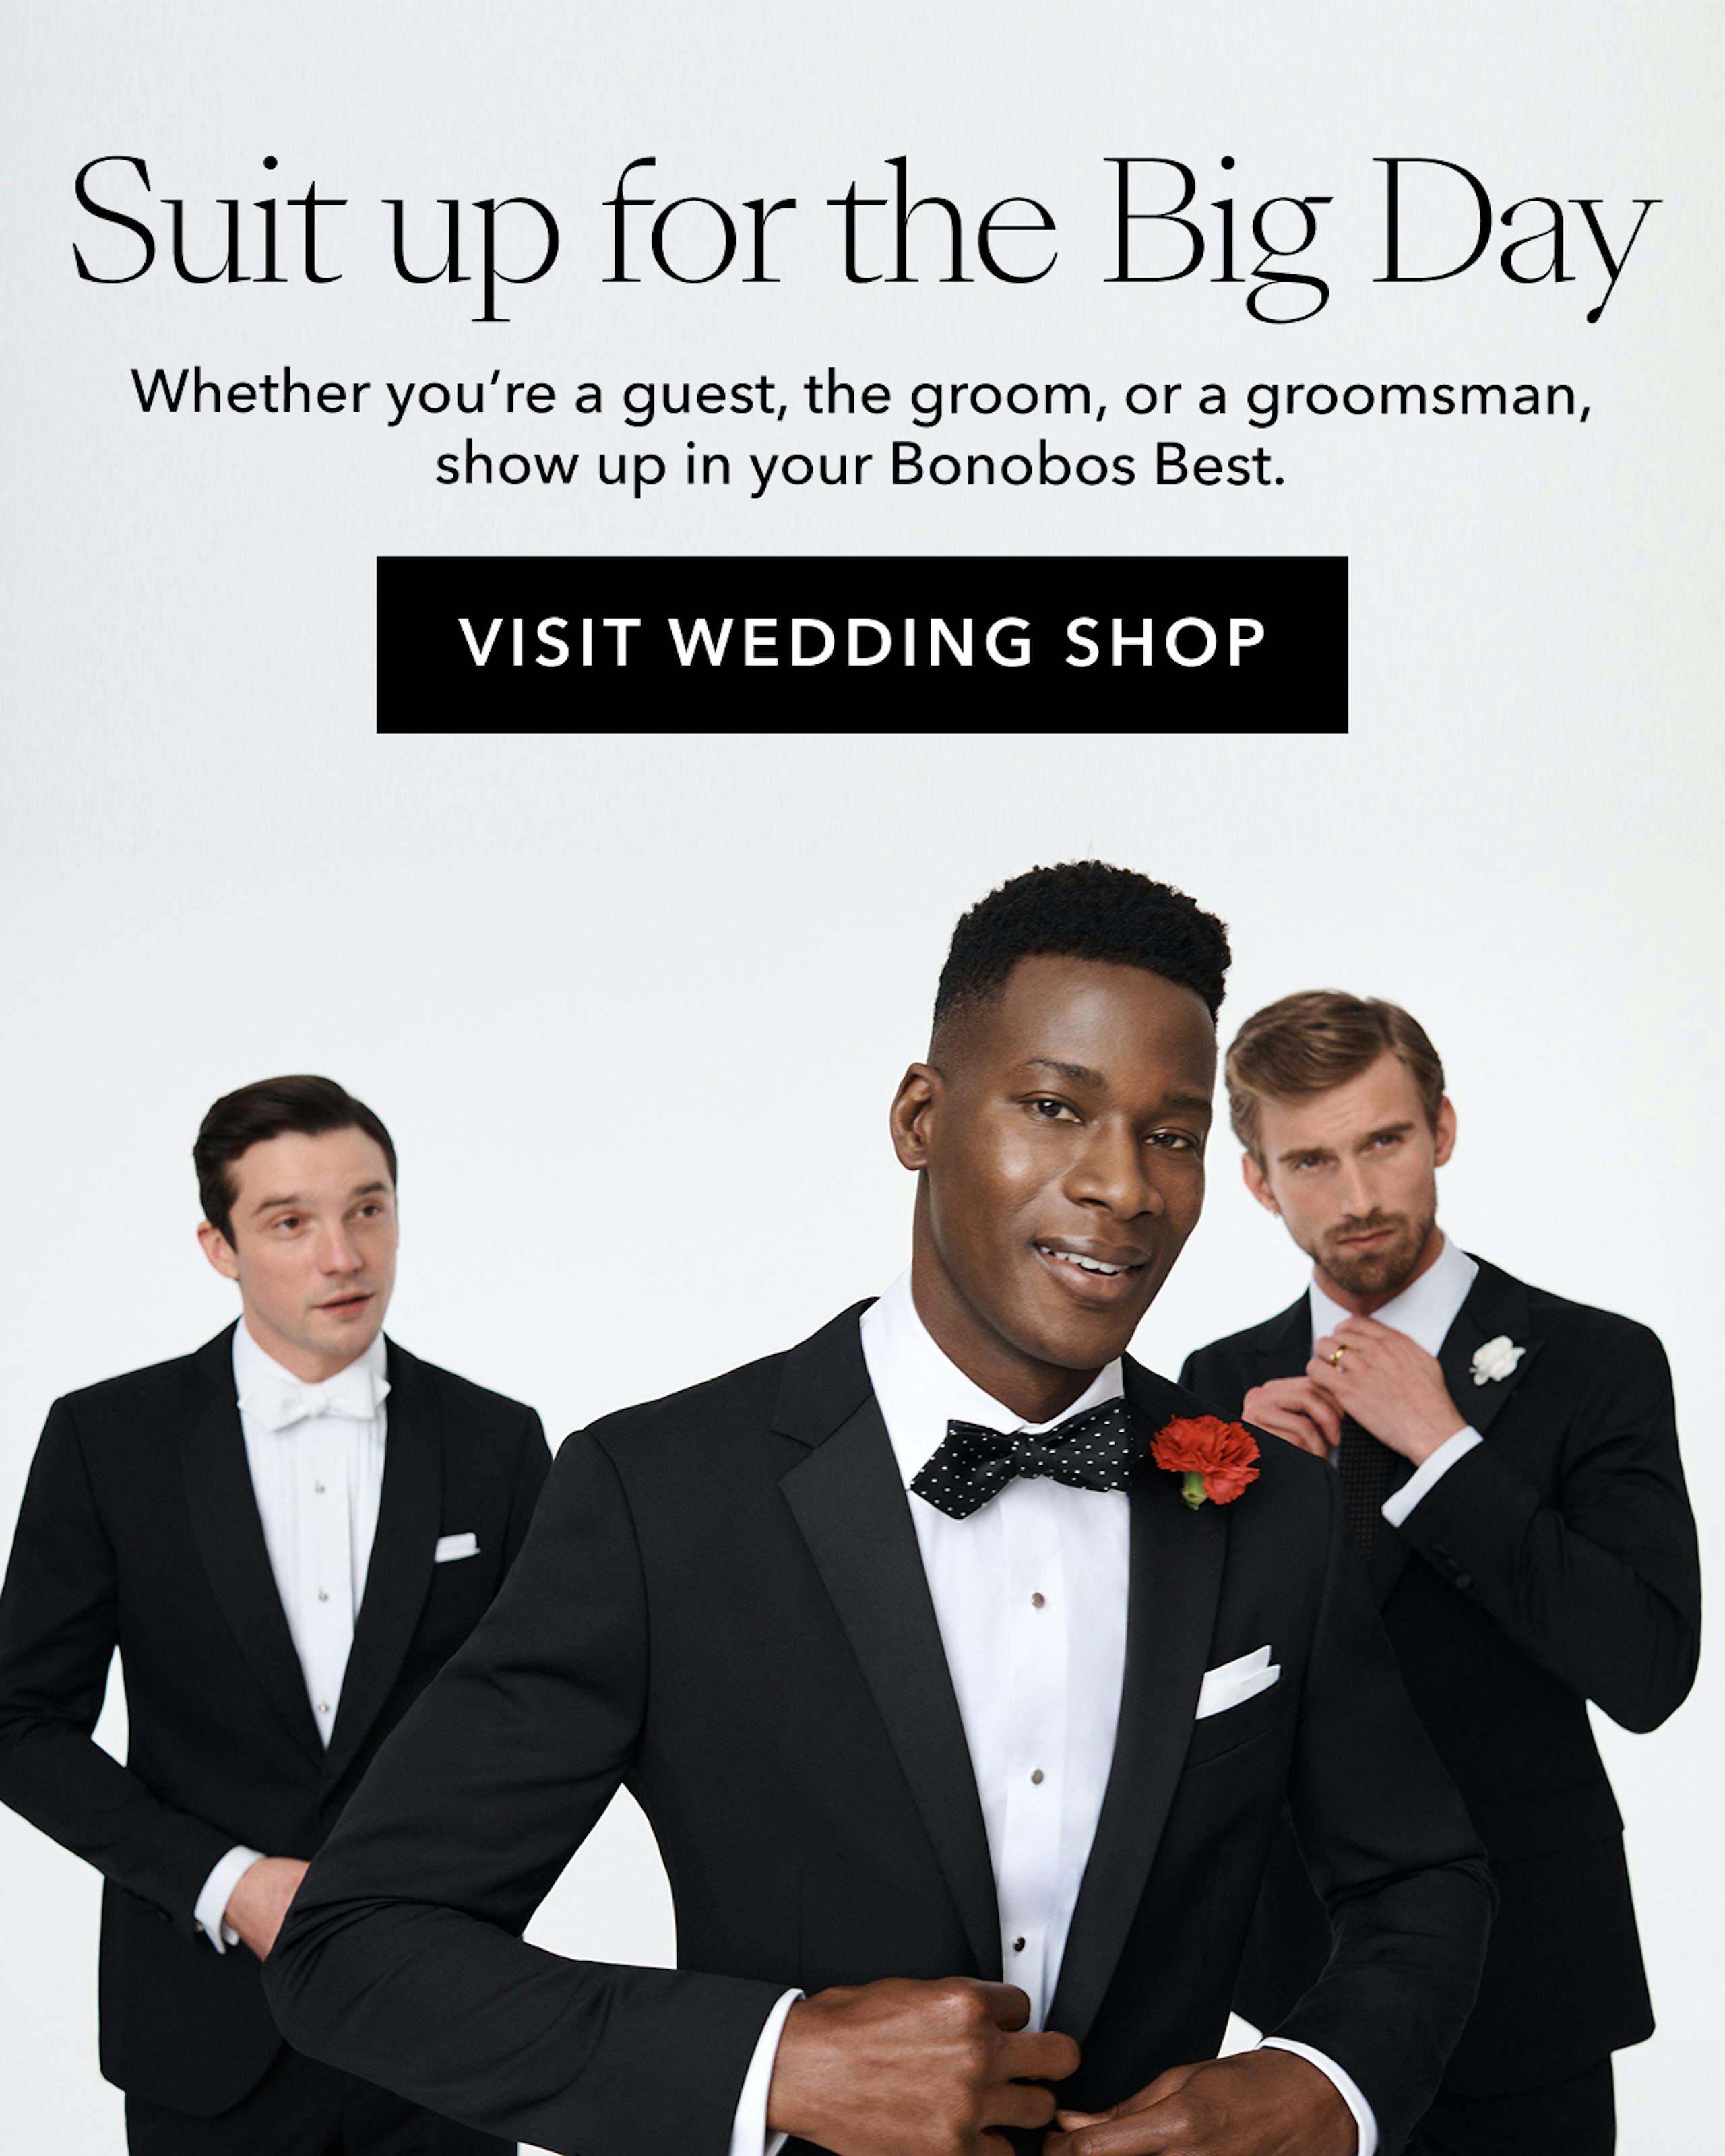 Suit up for the Big Day | Whether you're a guest, the groom, or a groomsman, show up in your Bonobos Best. | Visit Wedding Shop